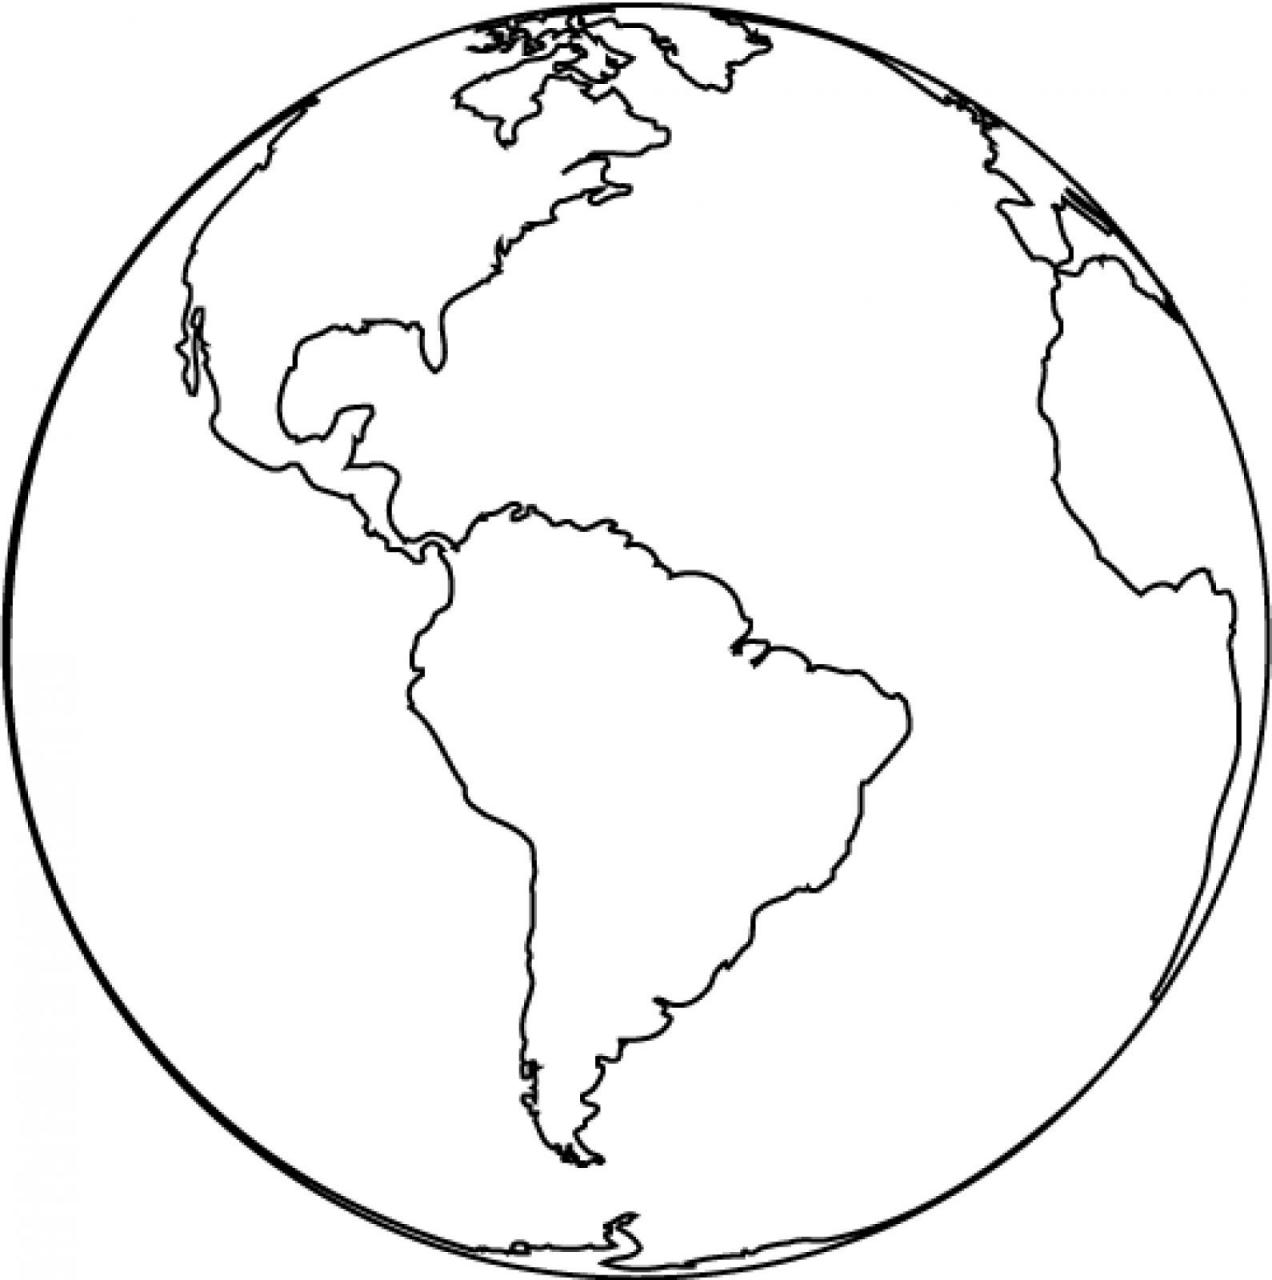 Black And White Earth Coloring Page Coloring Page For Kids | Kids ...